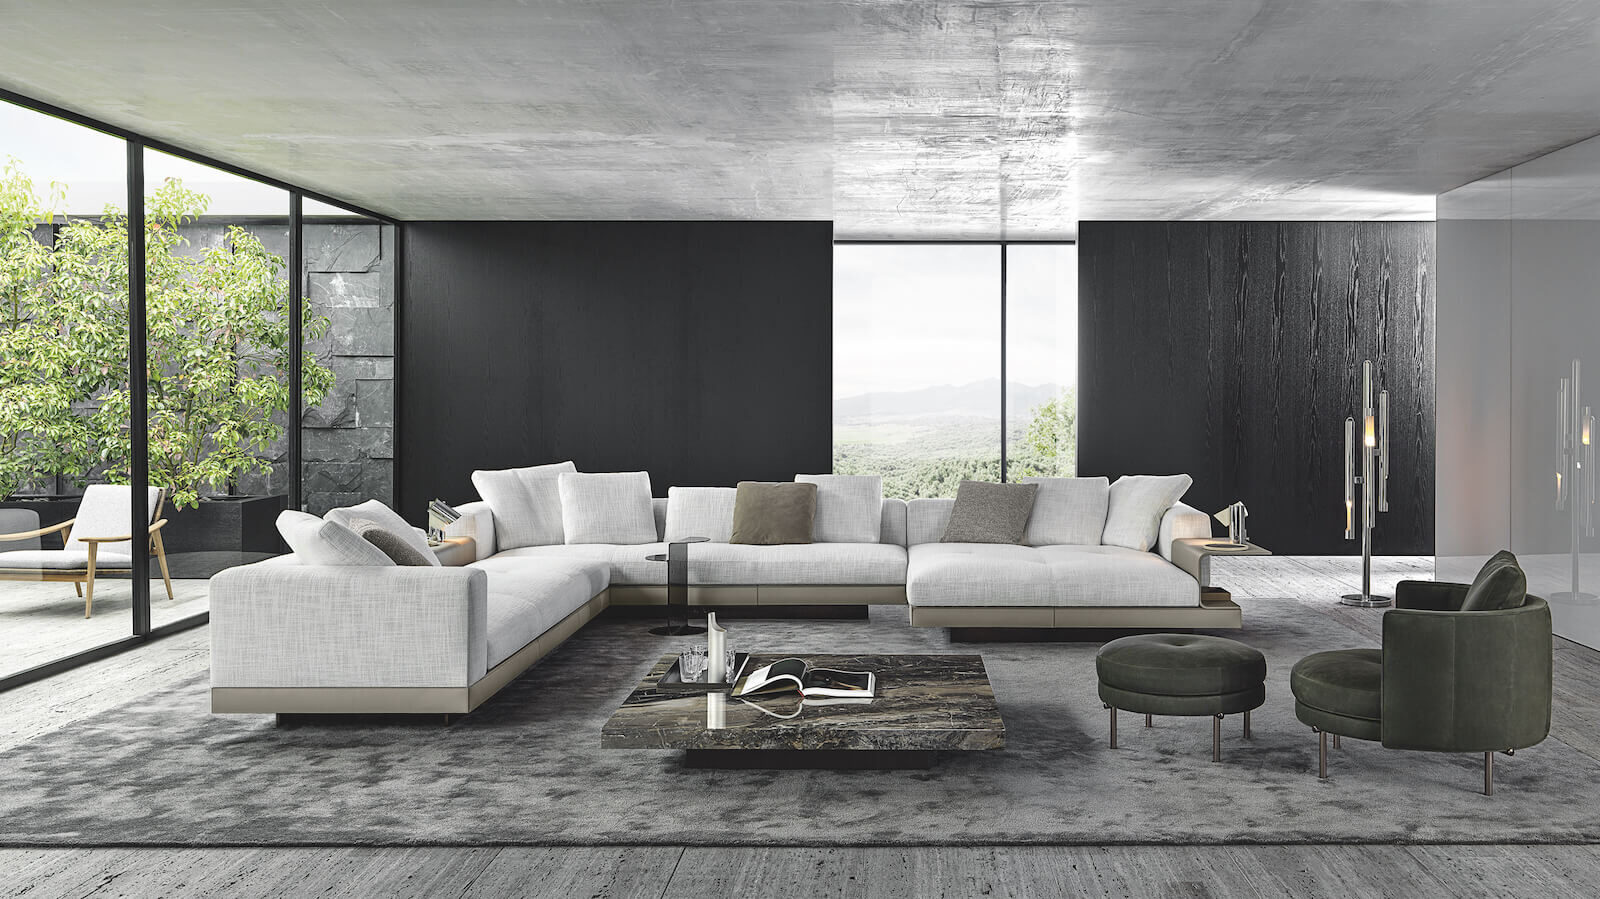 How to make a large modern living room feel cozy with black walls and white furniture.